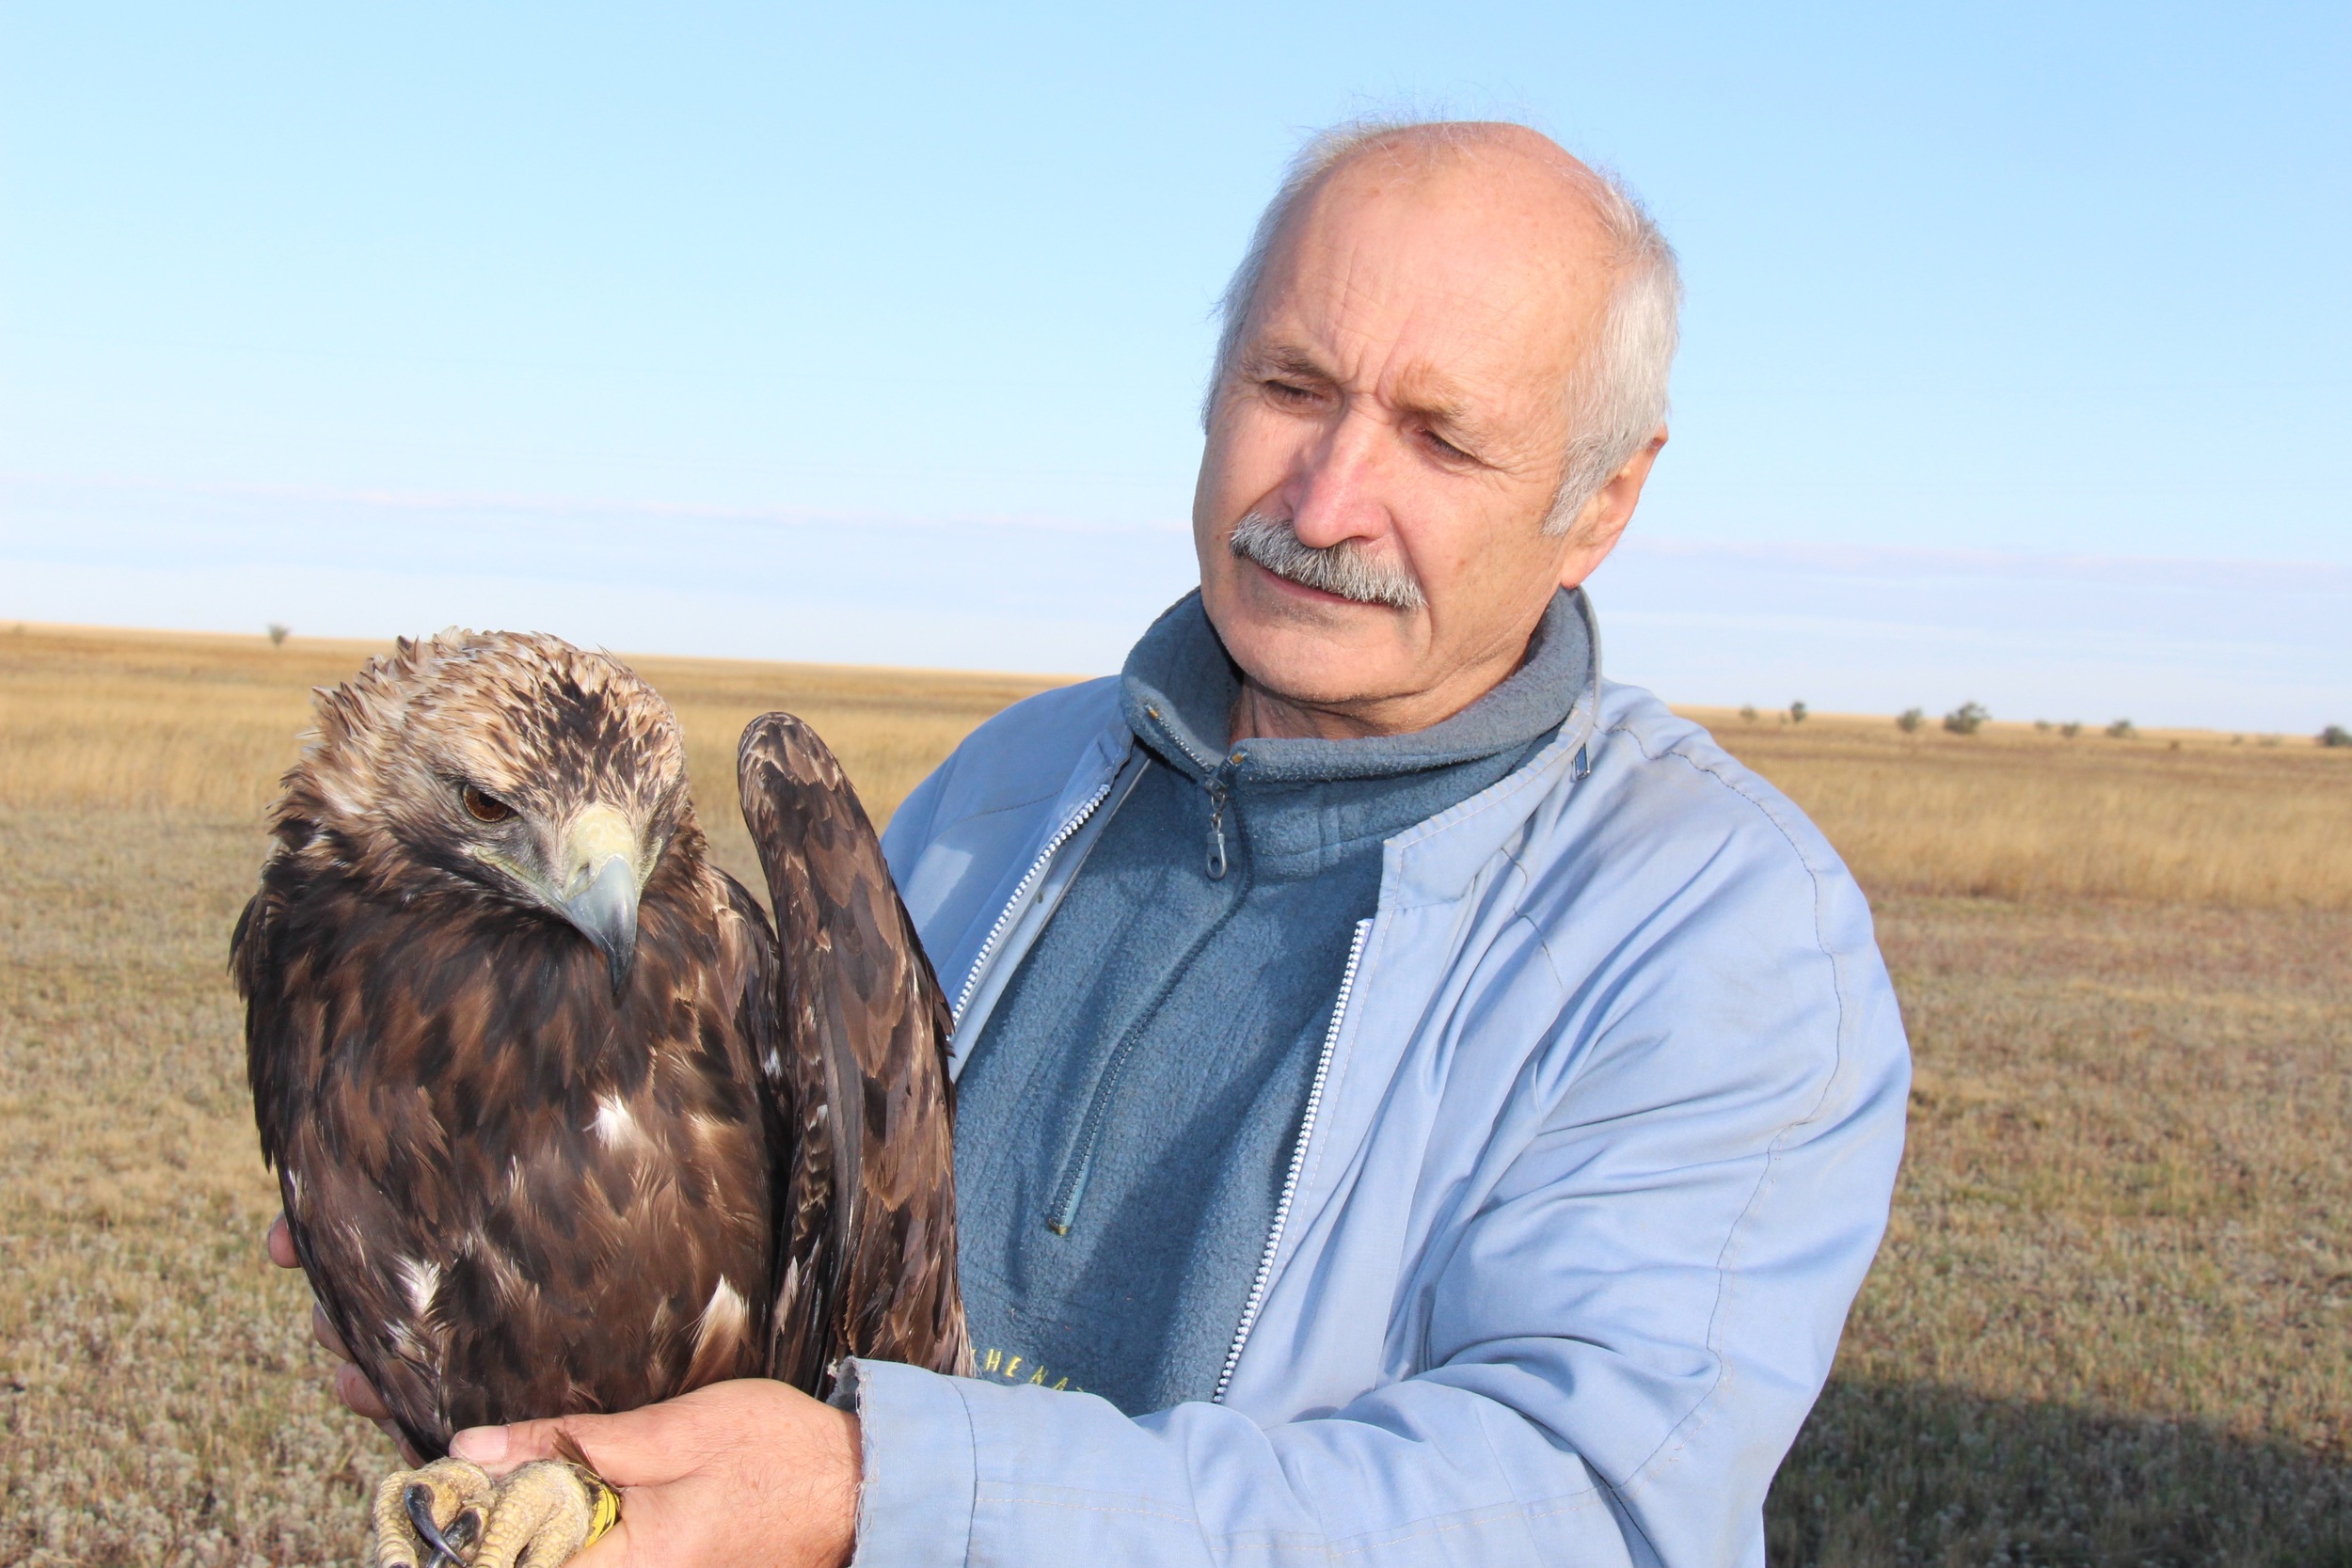  Dr. Bragin with eagle 